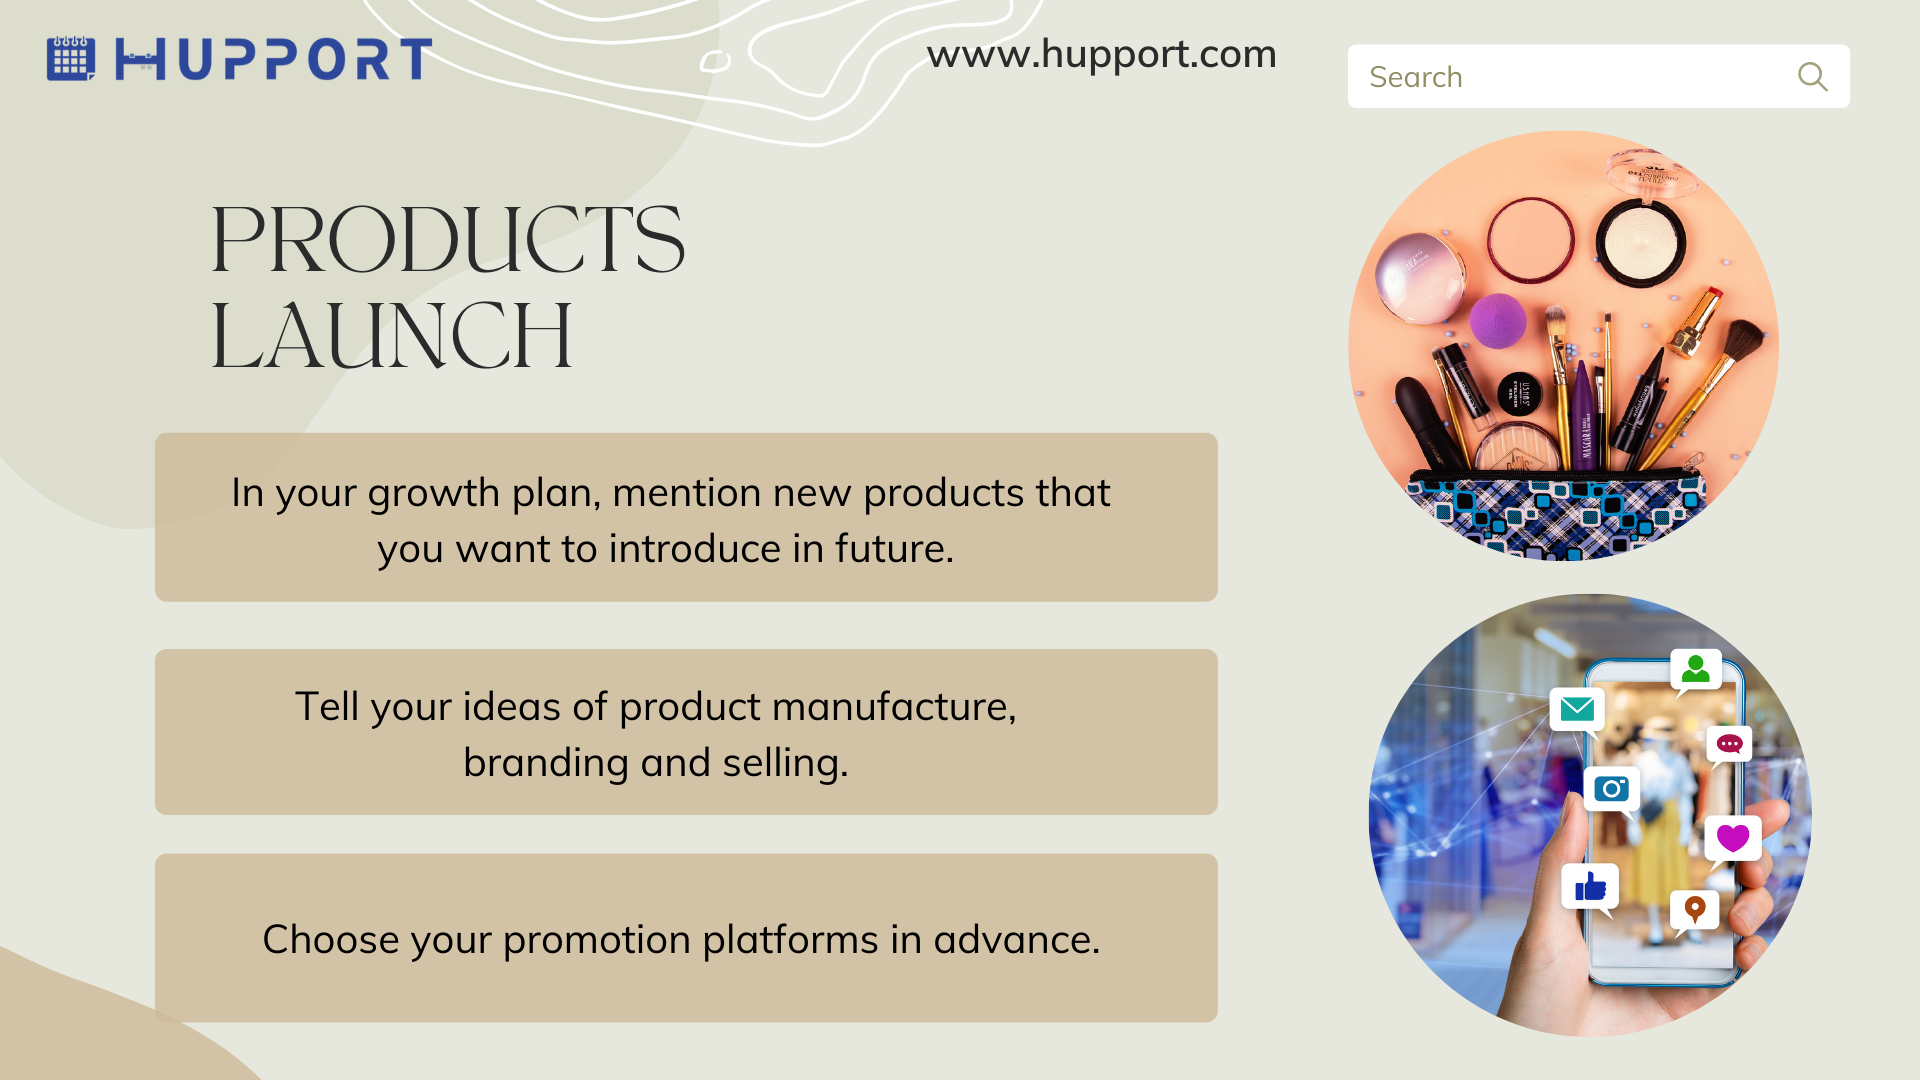 Products launch